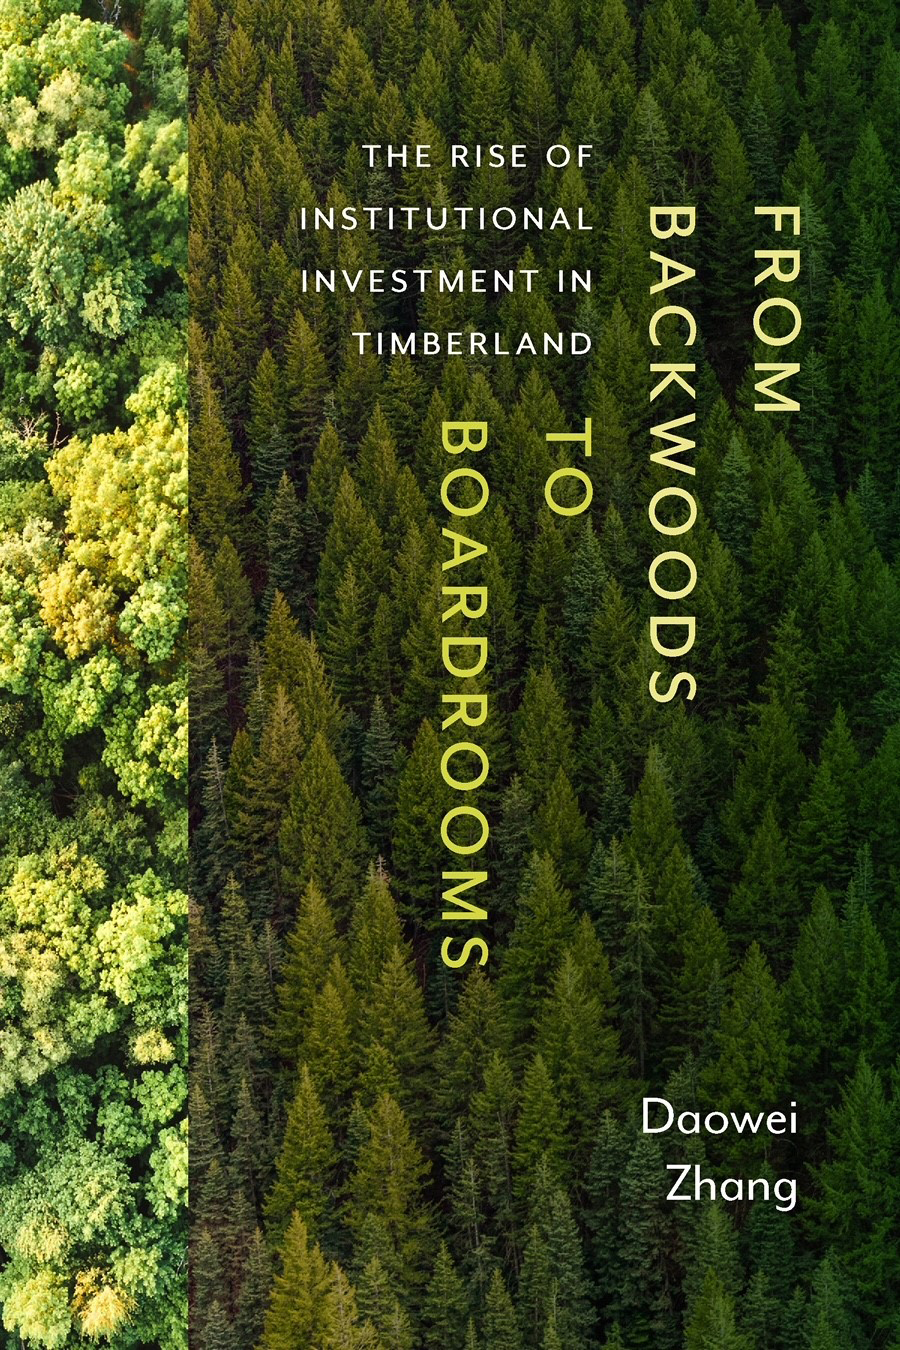 Book cover: "From Backwoods to Boardrooms" by Daowei Zhang.